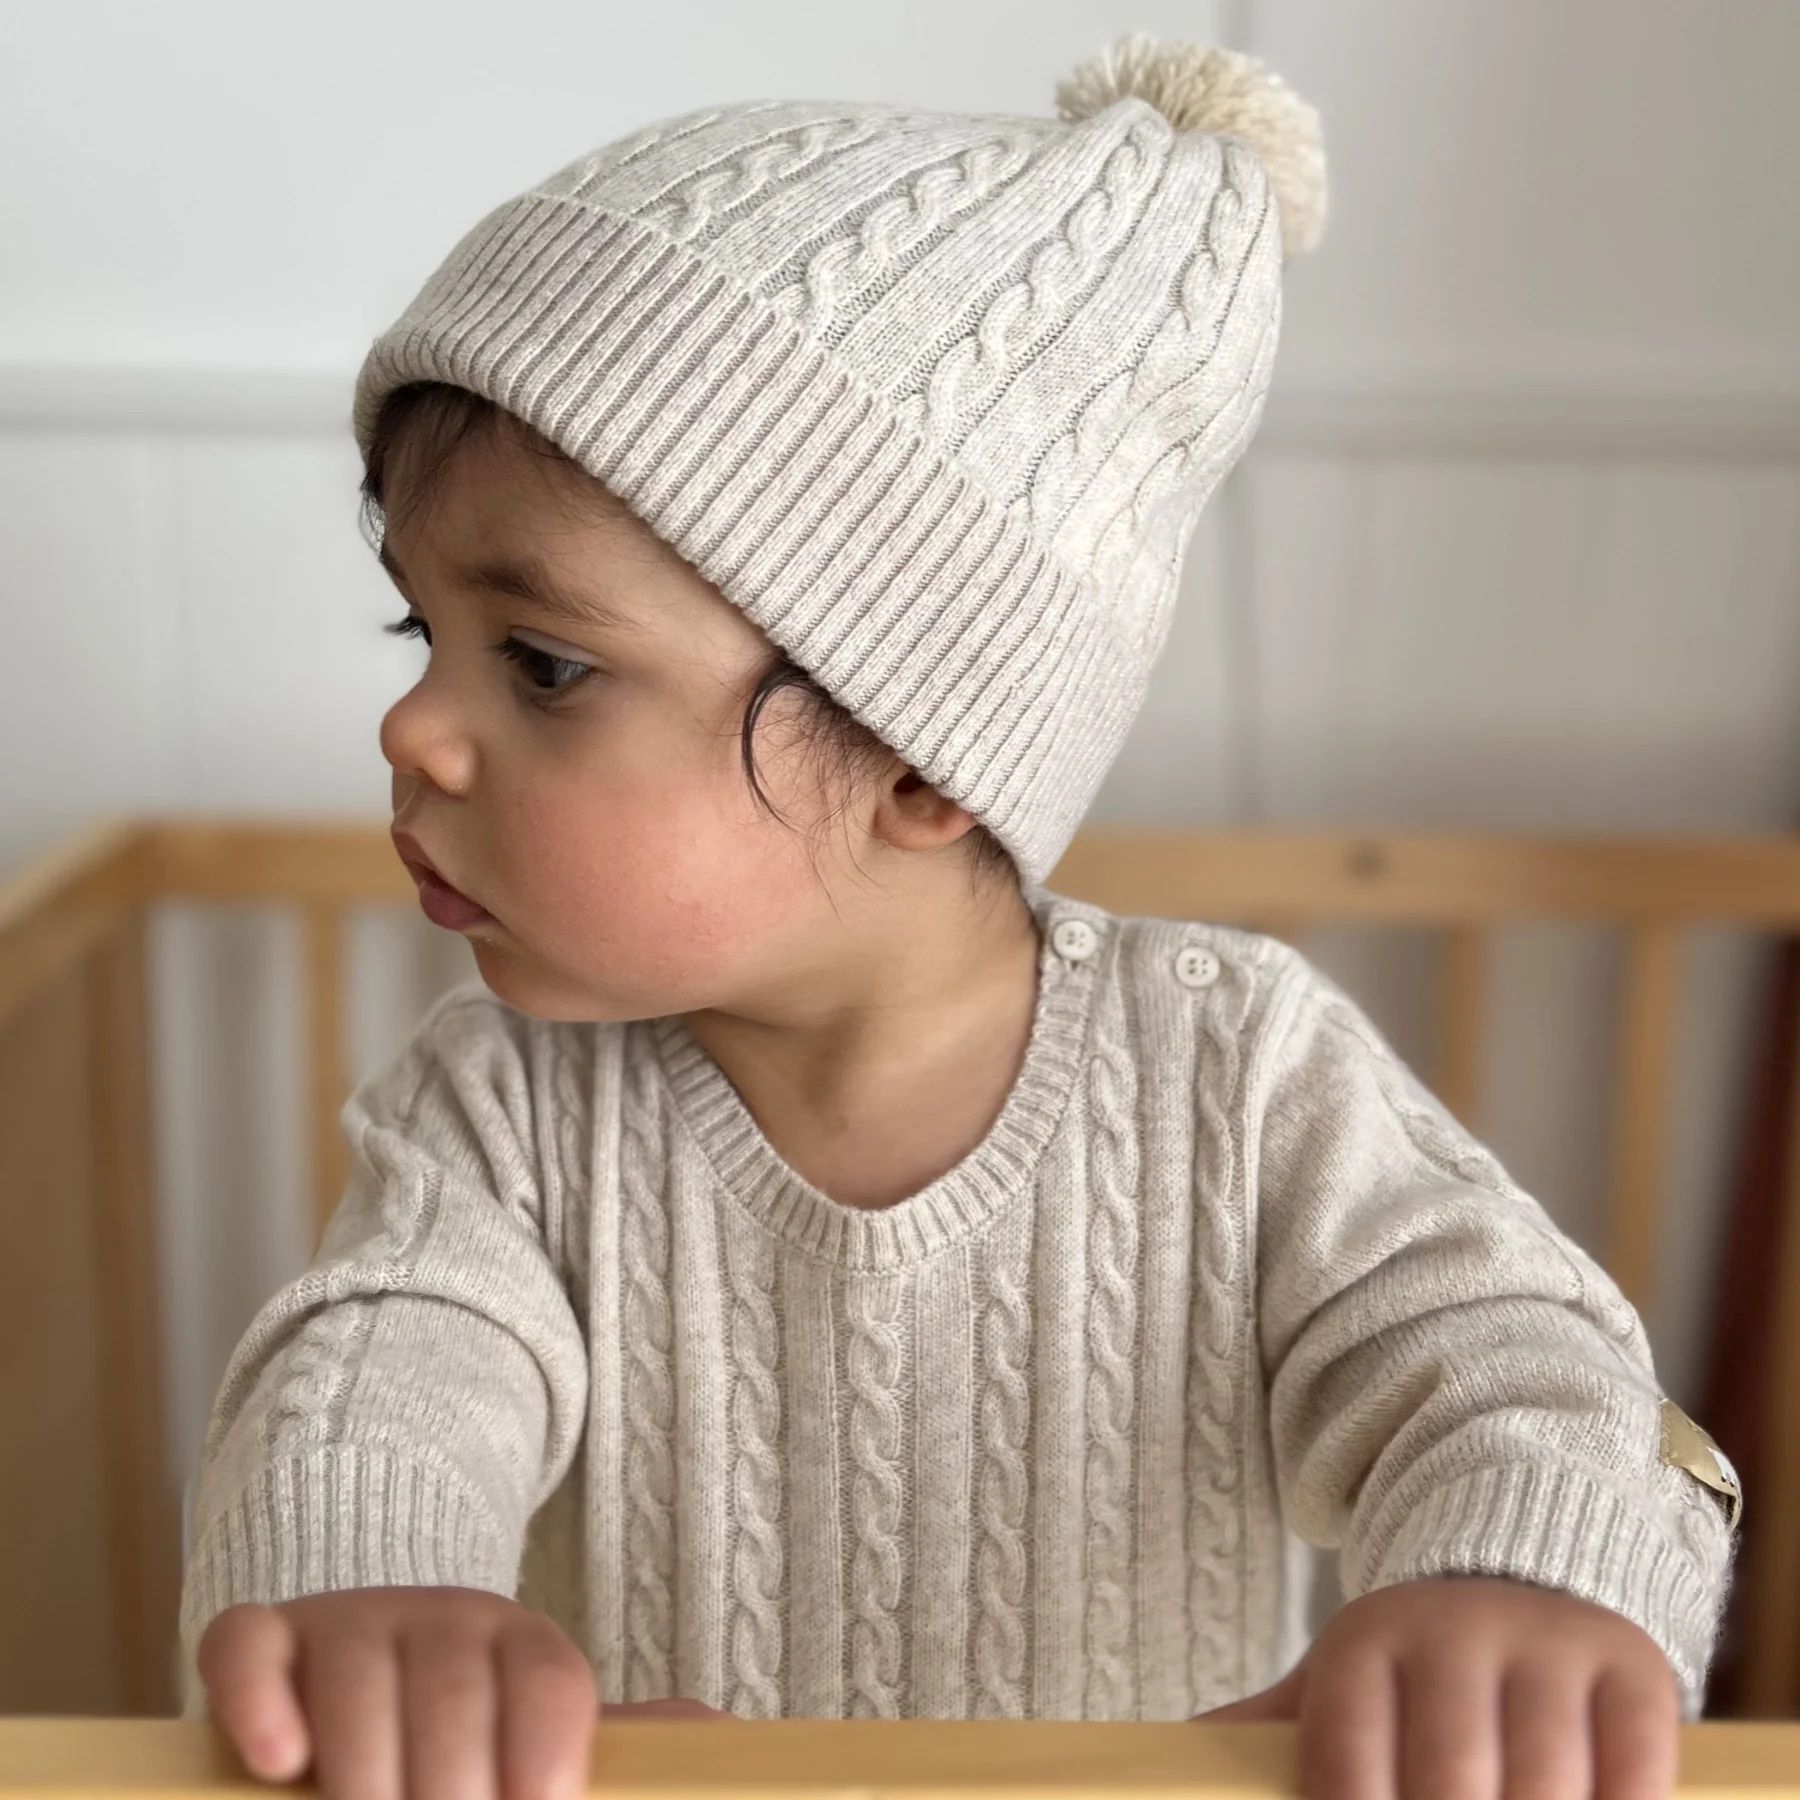 Baby wearing cashmere growsuit and beanie